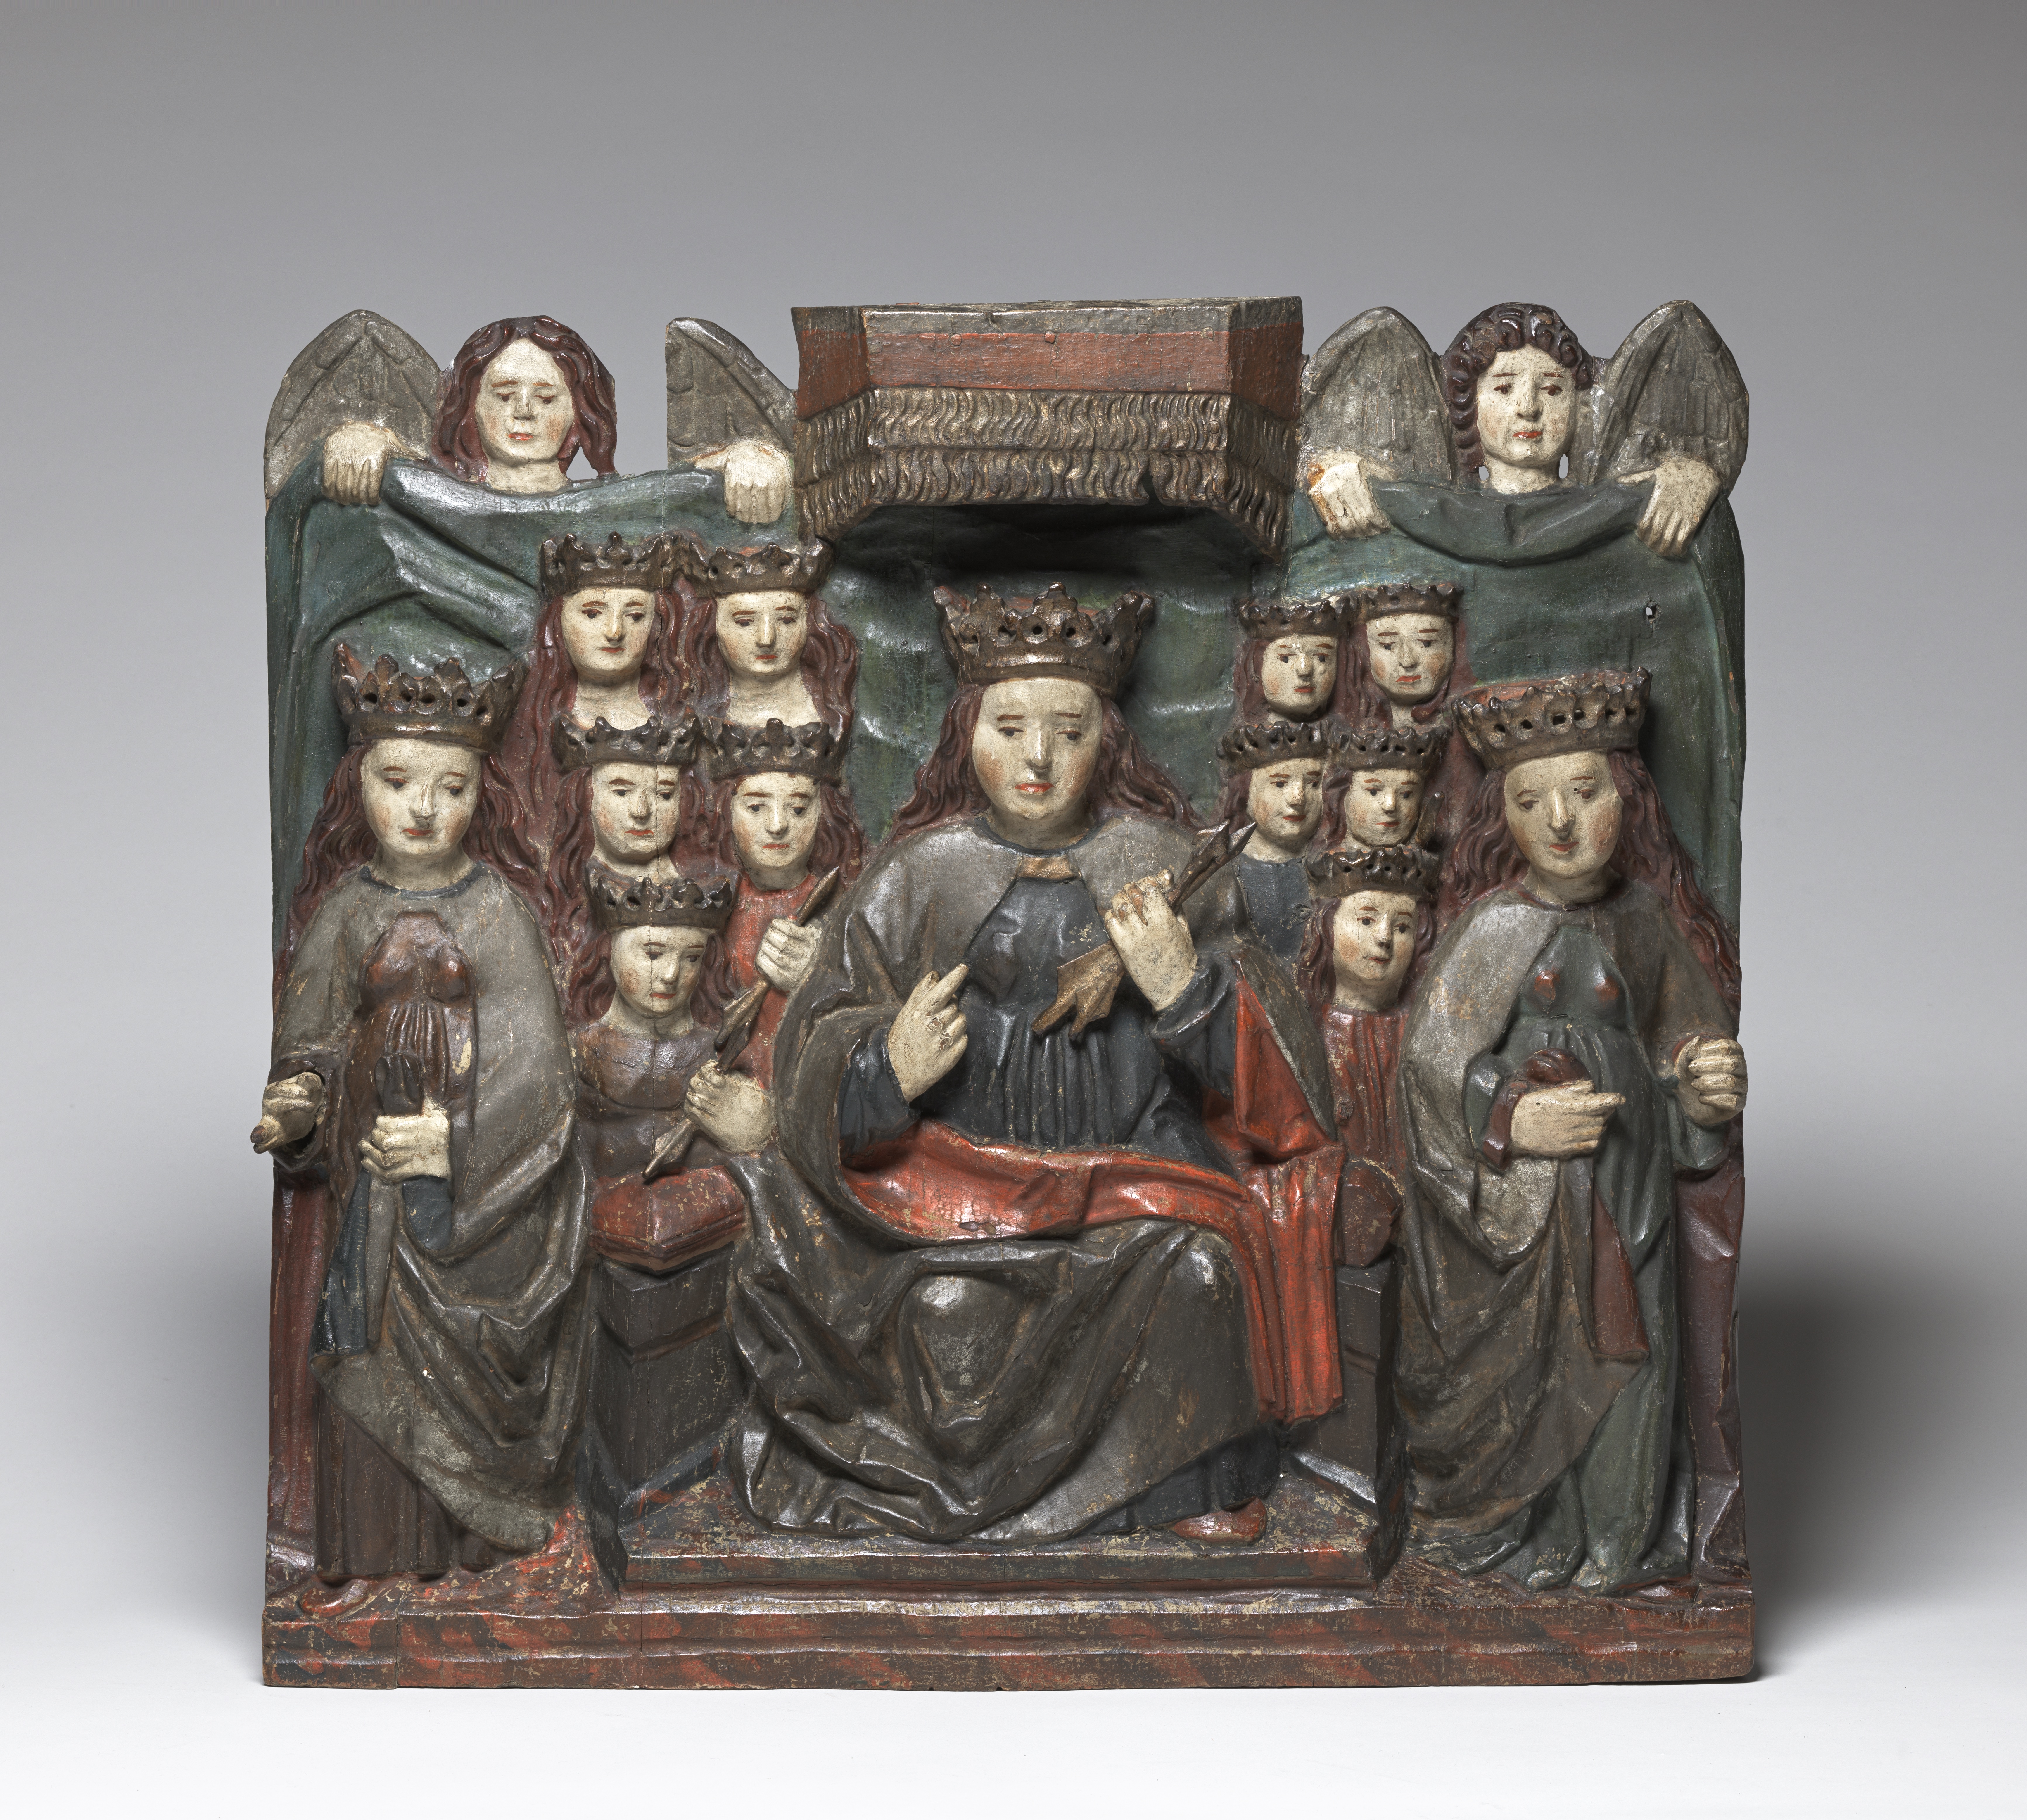 Wooden sculpture of many women wearing cloaks and crowns. 